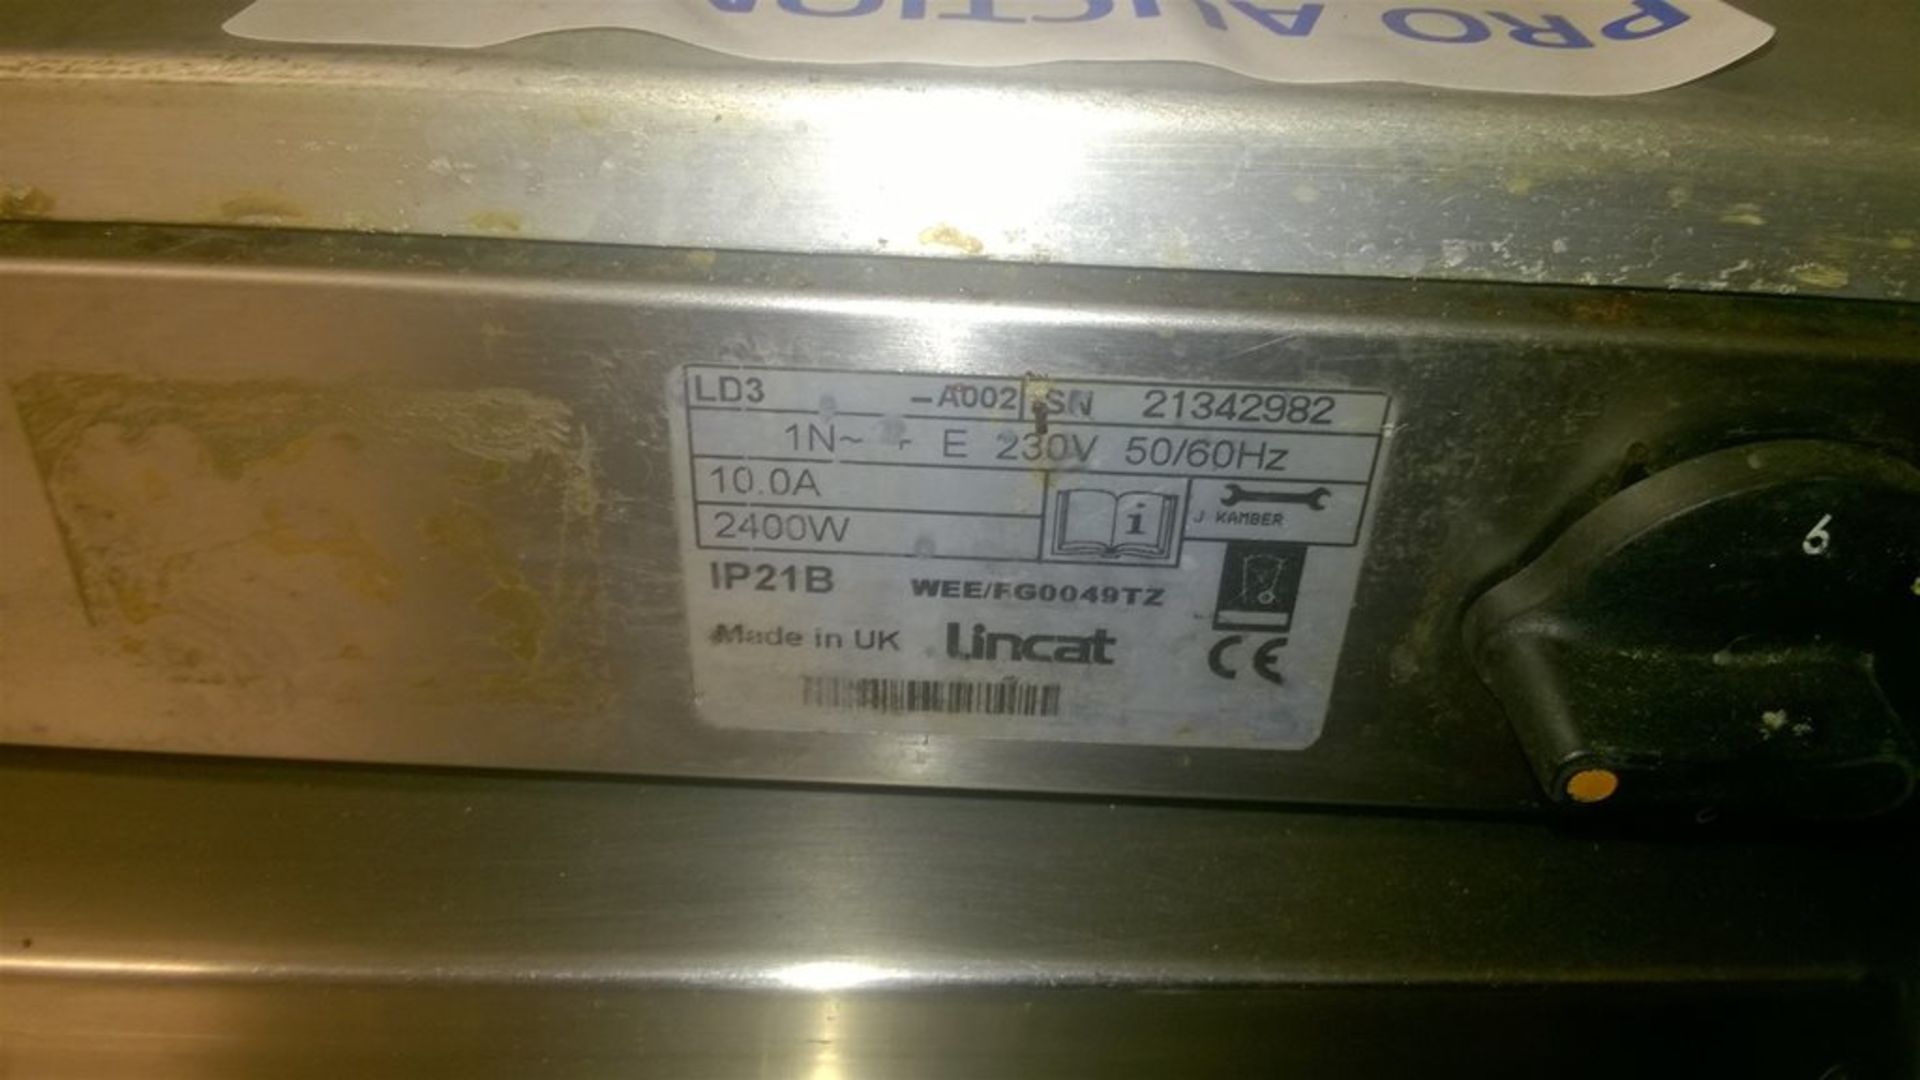 Lincat Ld3 Heated Display With Gantry Is A Counter Top Food Server Unit For Both Permanent And Mobi - Image 2 of 2